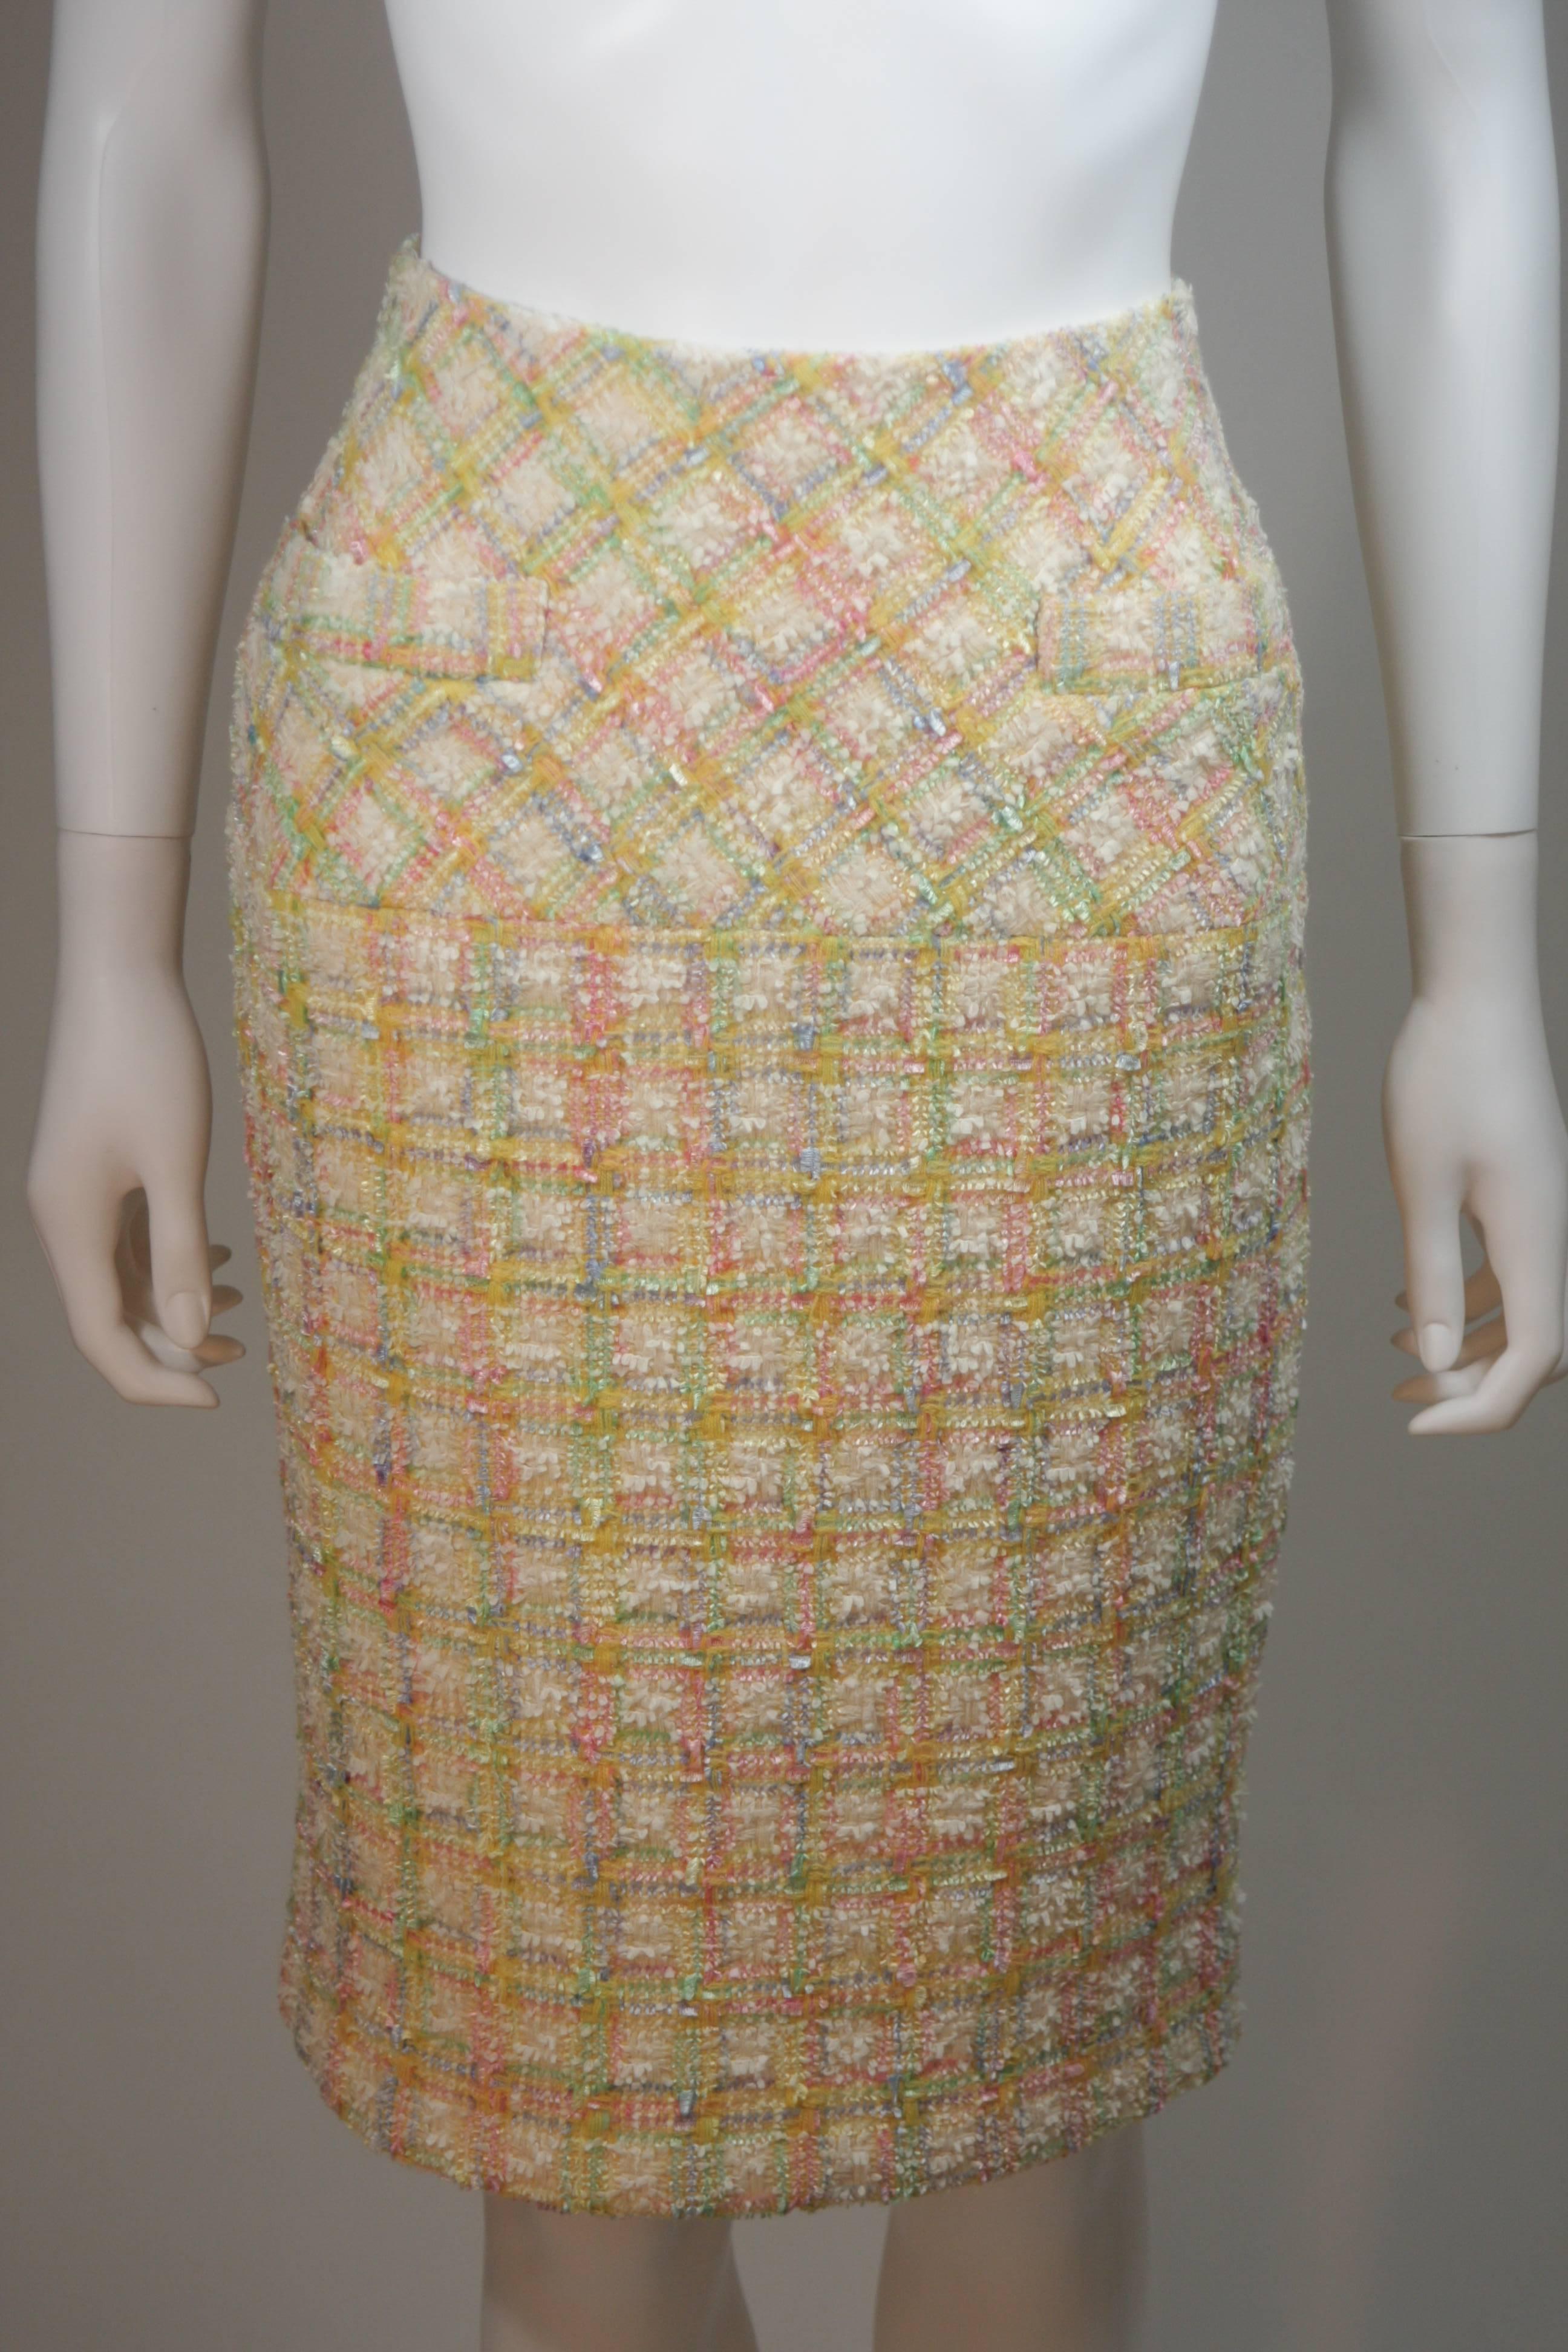 CHANEL Pastel Cream Yellow and Pink Skirt Suit Size 42 5